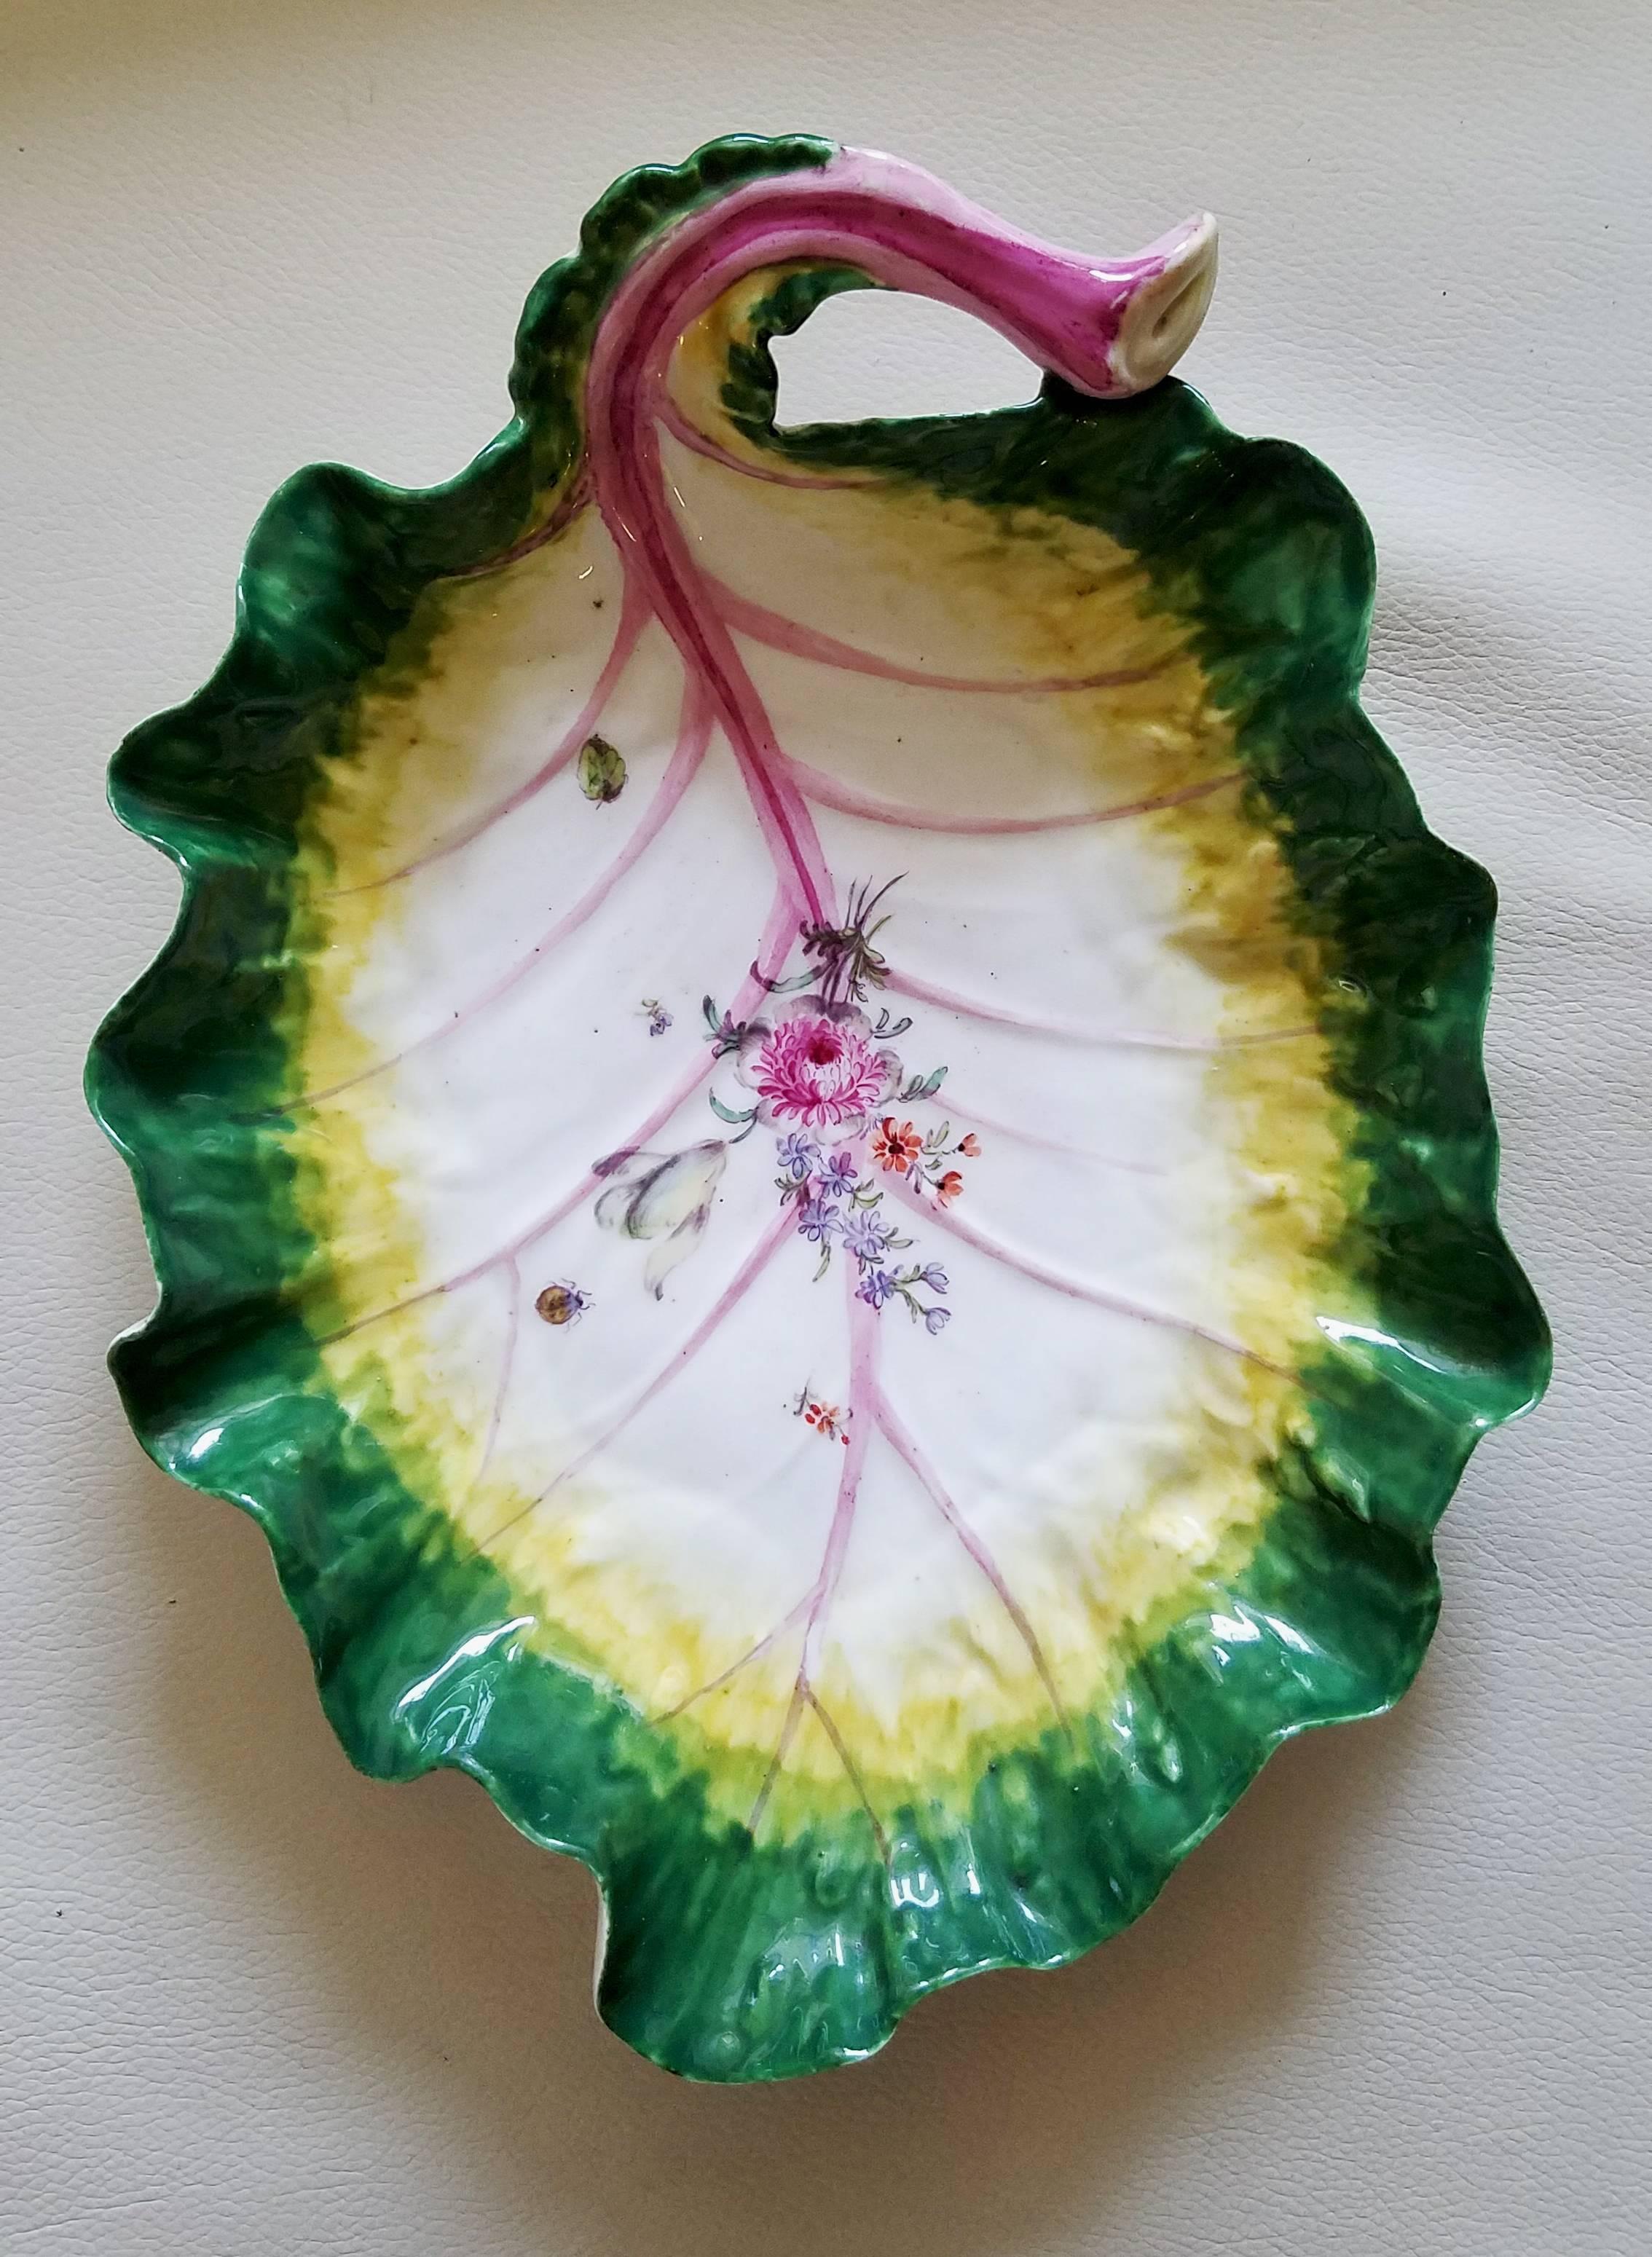 Pair of Chelsea Porcelain Tromp L'oeil leaf dishes, circa 1755

The large deep porcelain dishes are modelled in the form of a leaf with a dark green border with a yellow interior and purple veining. Across the center of each is a floral